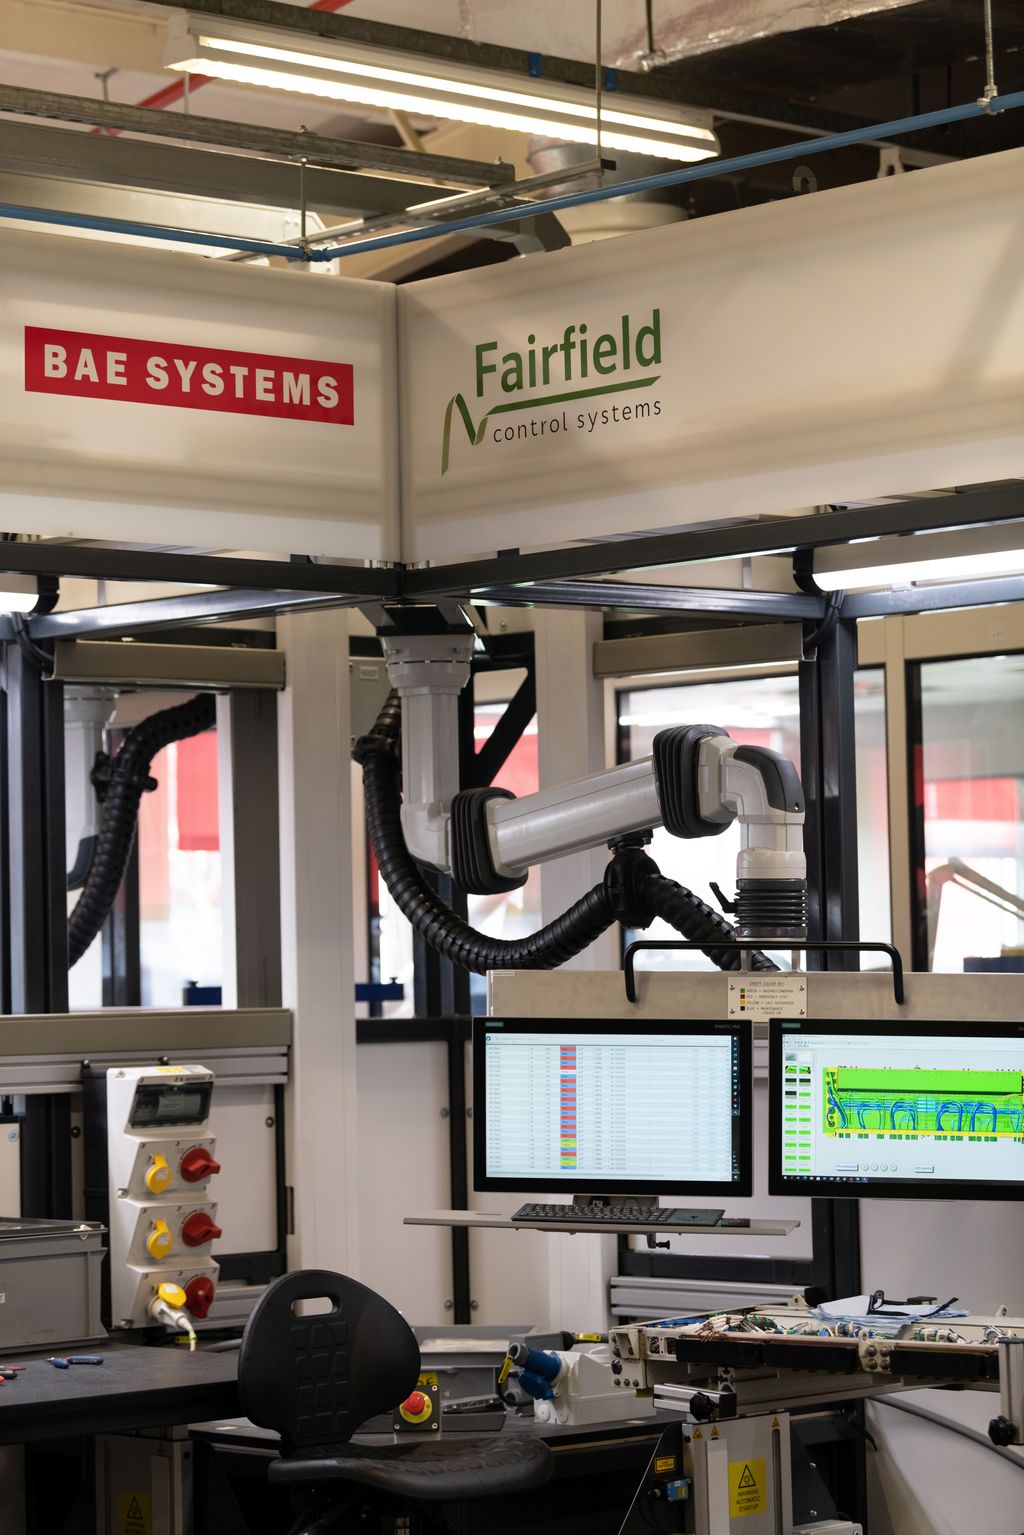 Fairfield Control Systems played a key role in the supply of the smart gantry system 